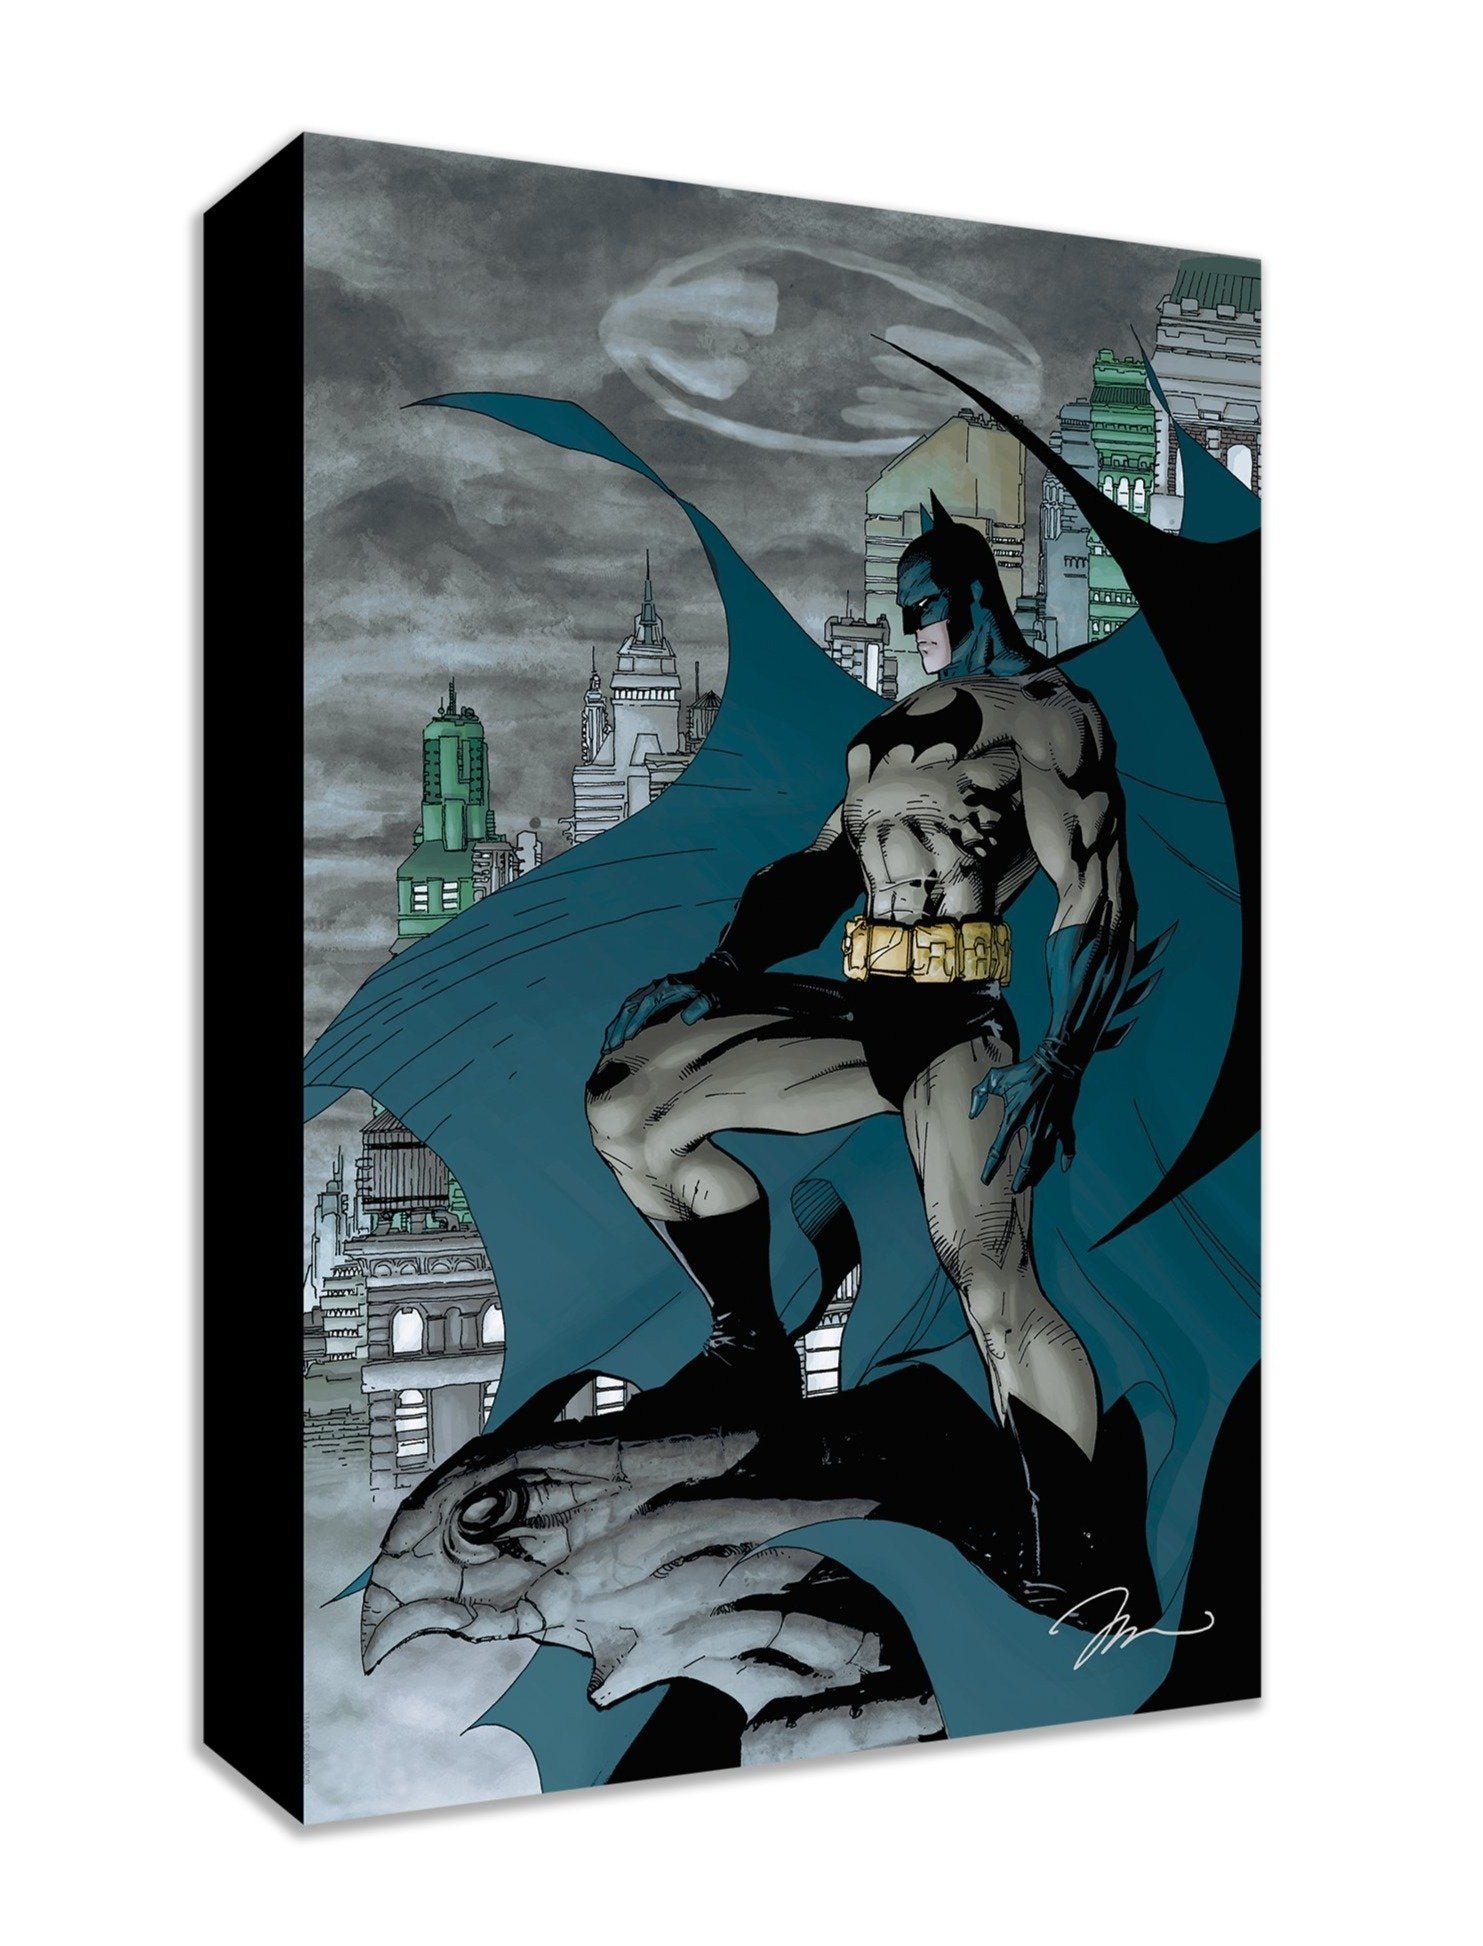  Knightwatch by Jim Lee  Batman watched over the city.